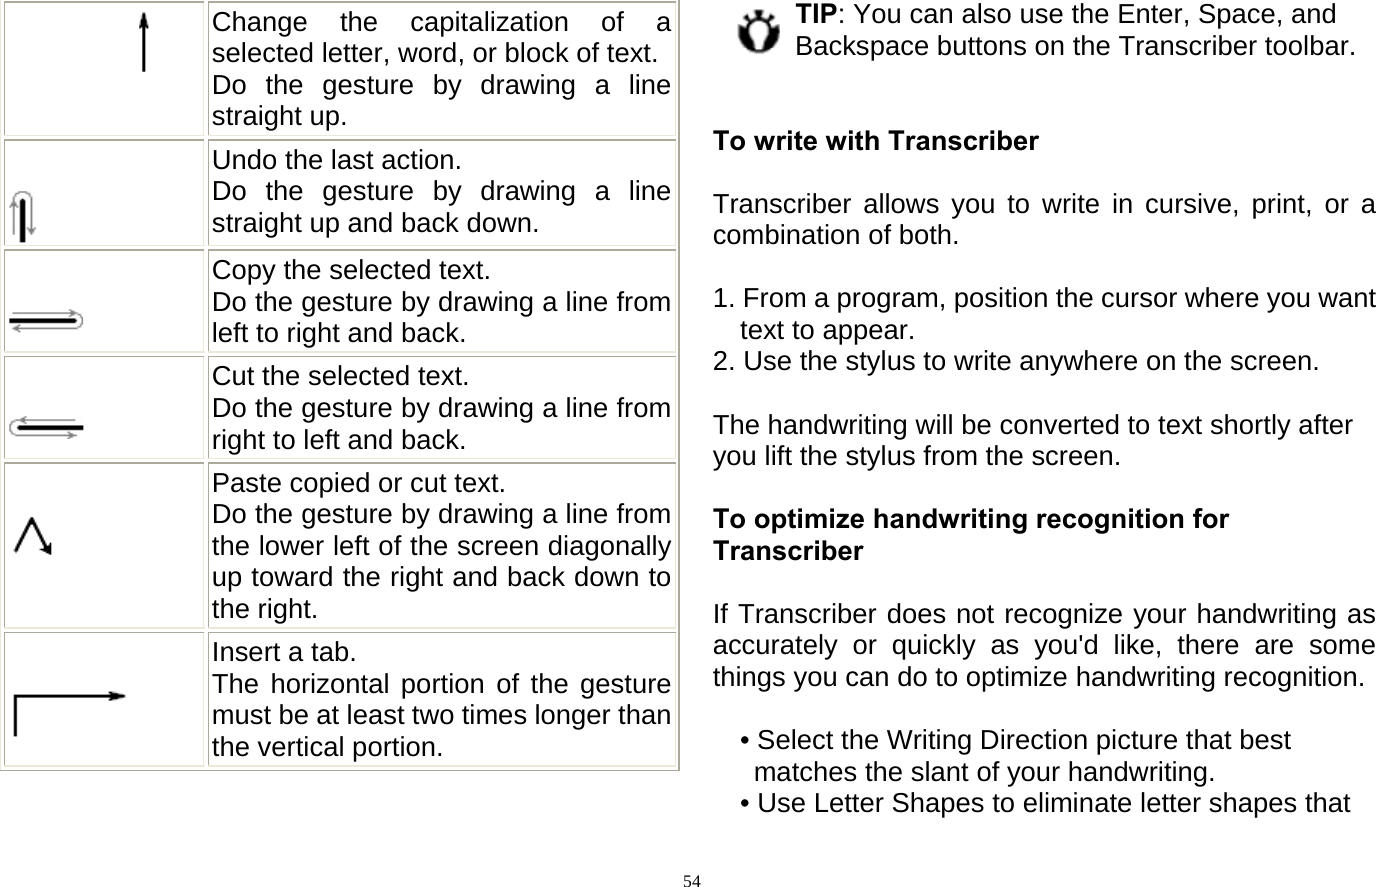  54       Change the capitalization of a selected letter, word, or block of text. Do the gesture by drawing a line straight up.           Undo the last action.   Do the gesture by drawing a line straight up and back down.         Copy the selected text.   Do the gesture by drawing a line from left to right and back.         Cut the selected text.   Do the gesture by drawing a line from right to left and back.           Paste copied or cut text.   Do the gesture by drawing a line from the lower left of the screen diagonally up toward the right and back down to the right.        Insert a tab.   The horizontal portion of the gesture must be at least two times longer than the vertical portion.  TIP: You can also use the Enter, Space, and Backspace buttons on the Transcriber toolbar.   To write with Transcriber  Transcriber allows you to write in cursive, print, or a combination of both.  1. From a program, position the cursor where you want text to appear. 2. Use the stylus to write anywhere on the screen.  The handwriting will be converted to text shortly after you lift the stylus from the screen.  To optimize handwriting recognition for Transcriber  If Transcriber does not recognize your handwriting as accurately or quickly as you&apos;d like, there are some things you can do to optimize handwriting recognition.  • Select the Writing Direction picture that best matches the slant of your handwriting.   • Use Letter Shapes to eliminate letter shapes that 